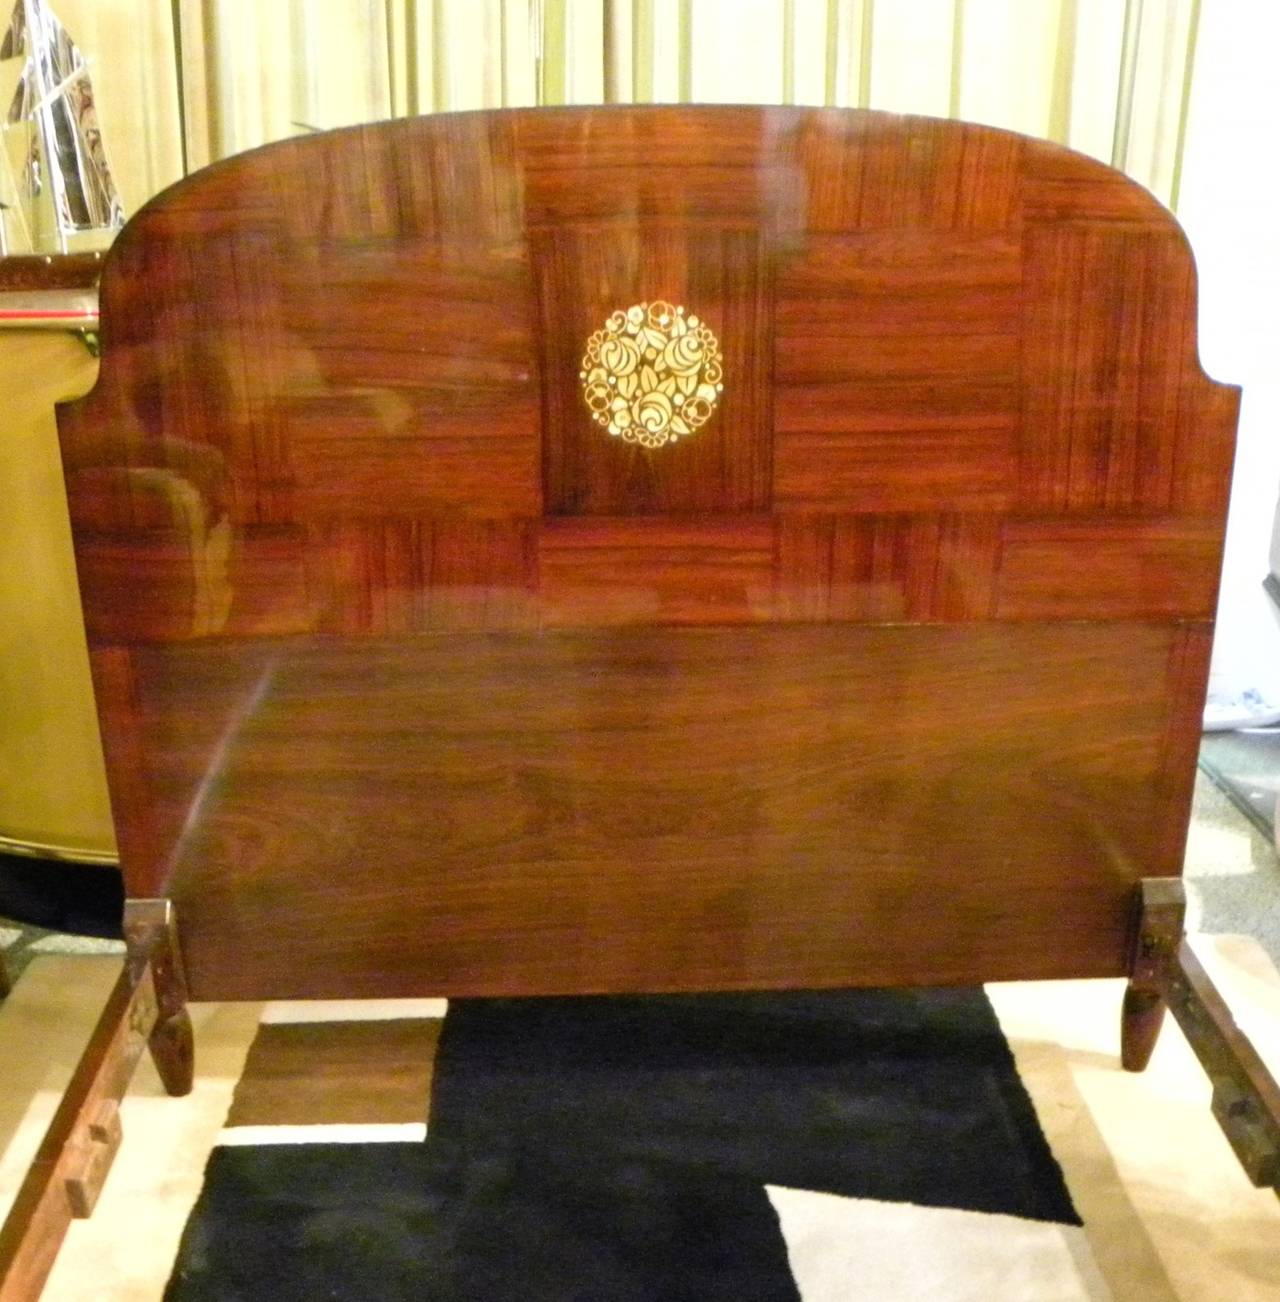 Detail and craftsmanship abound in this rich mahogany Art Deco bed frame with its wood grain laid out creating a unique checkerboard pattern. Both headboard and footboard depict a spectacular floral inlay work- a combination of mother-of-pearl,